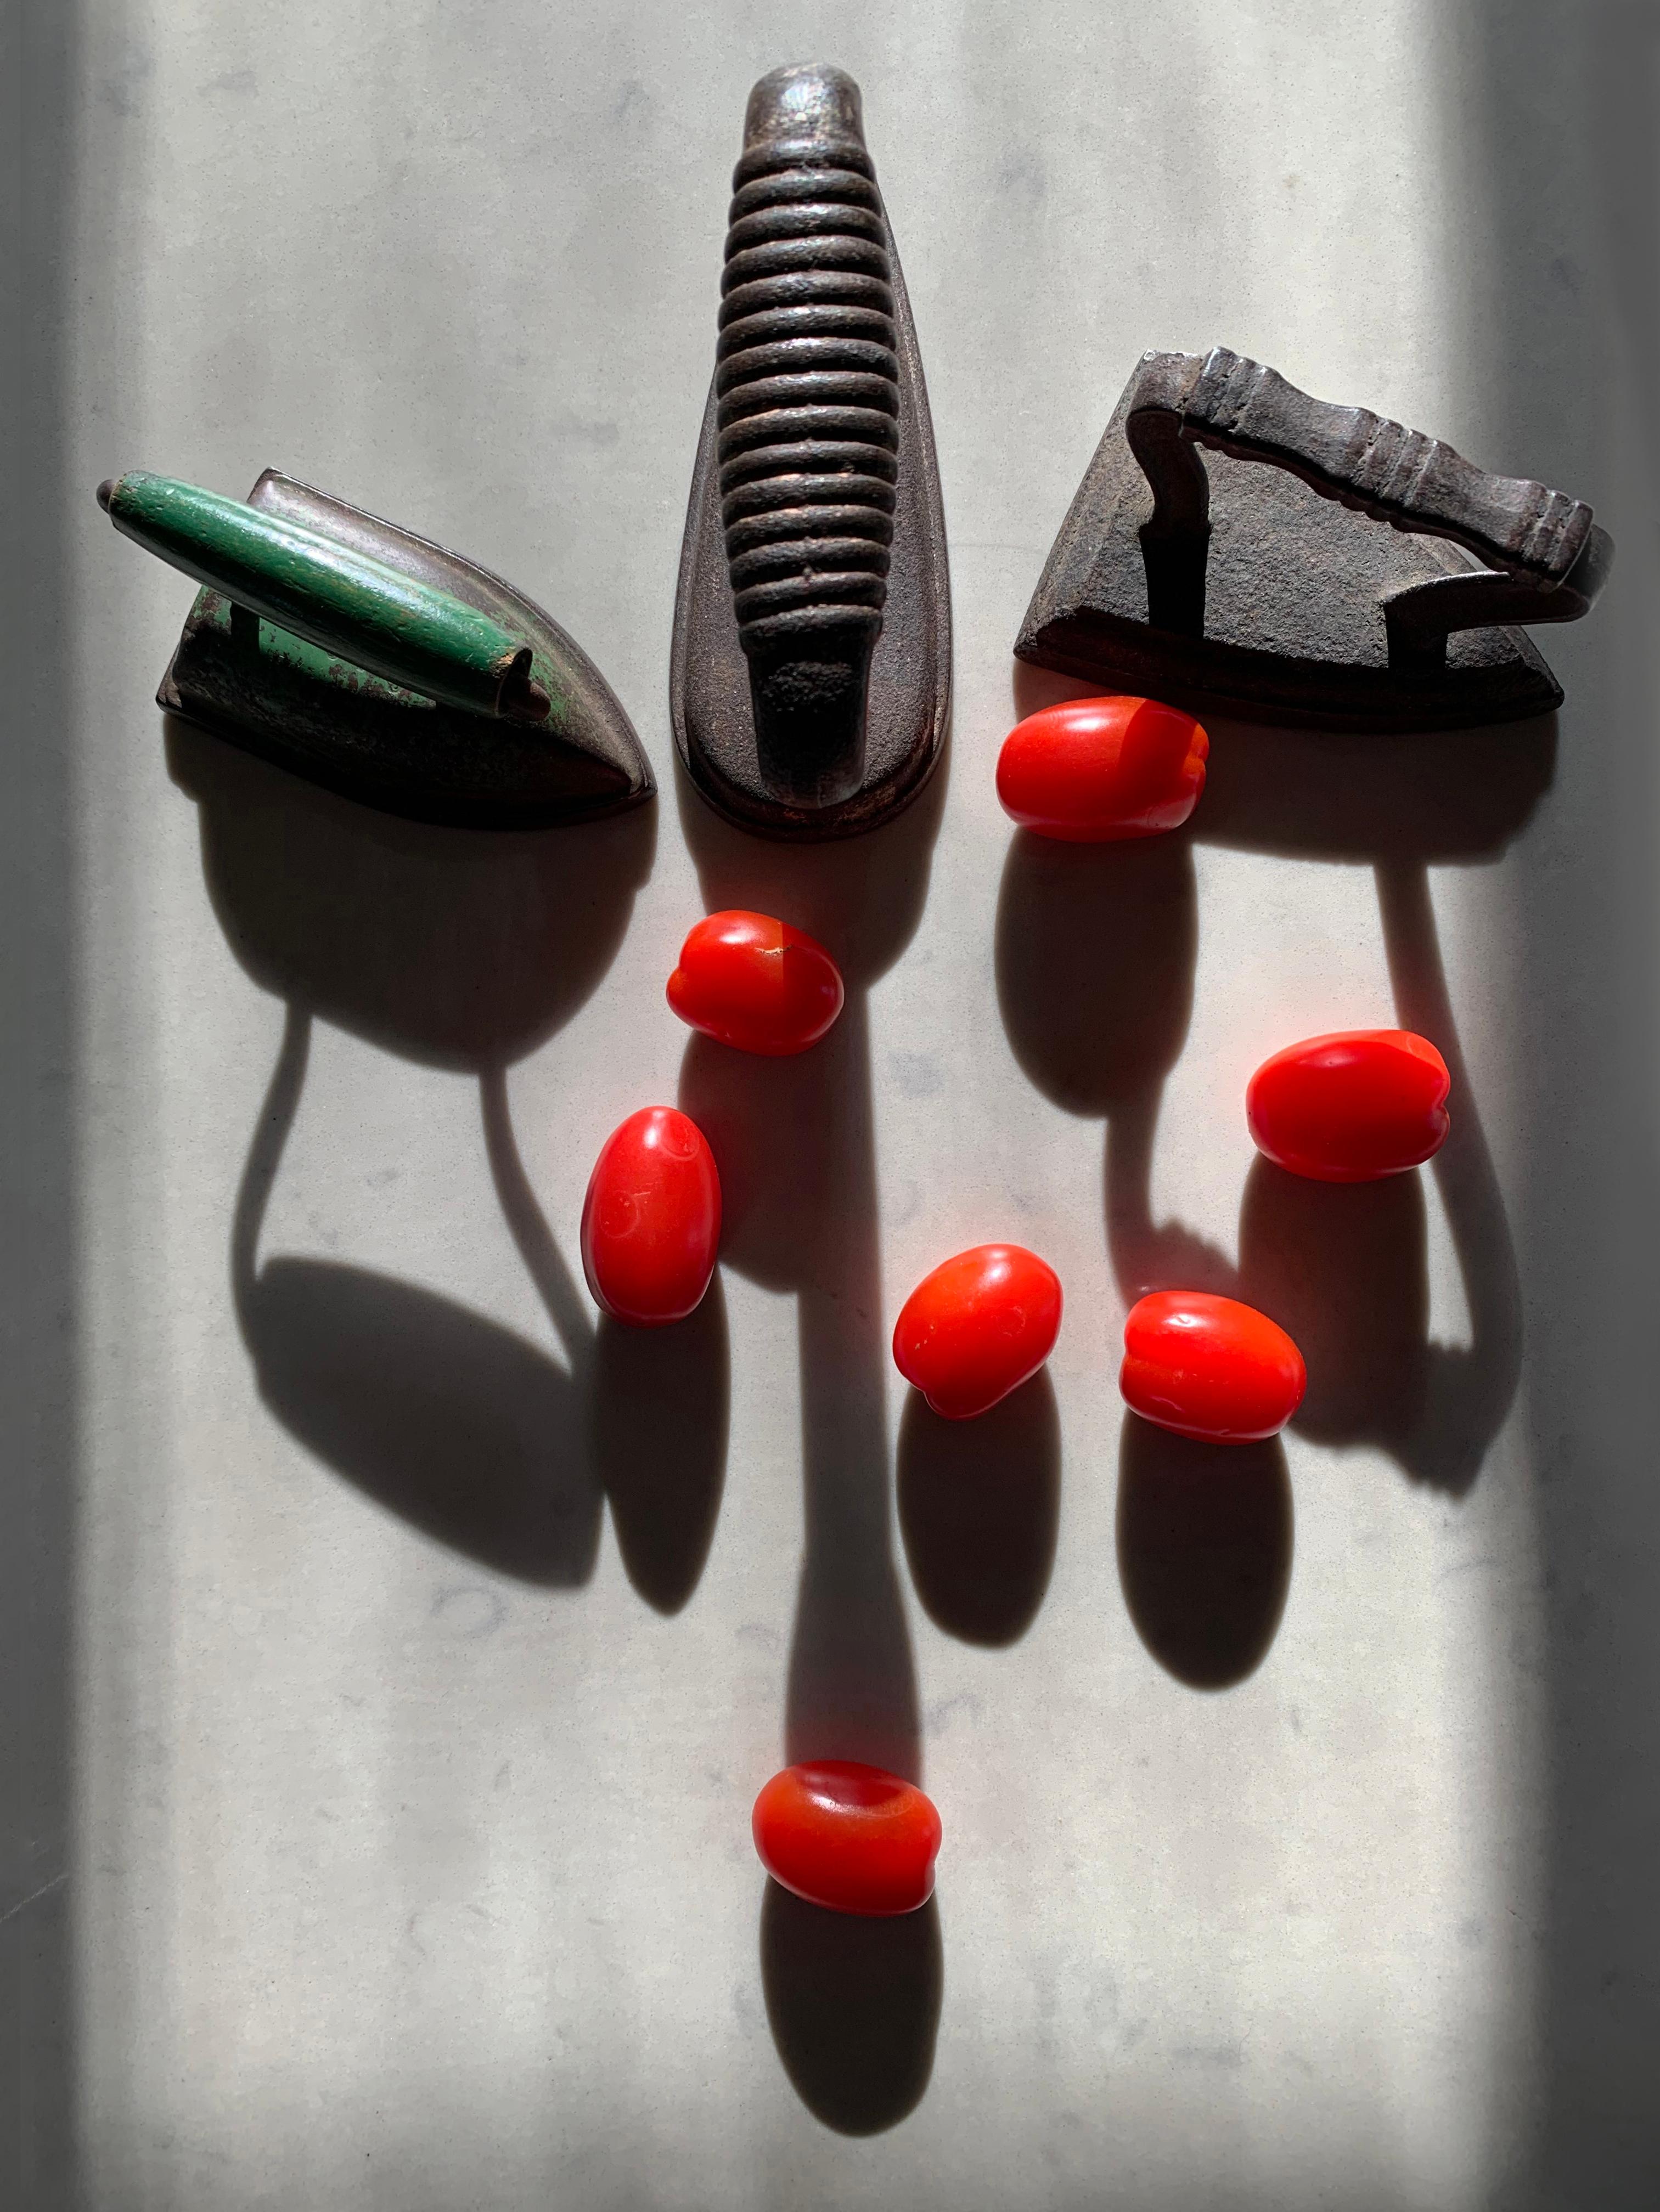 Irons and Tomatoes: still life color photograph w/ abstract shadow patterns, lg